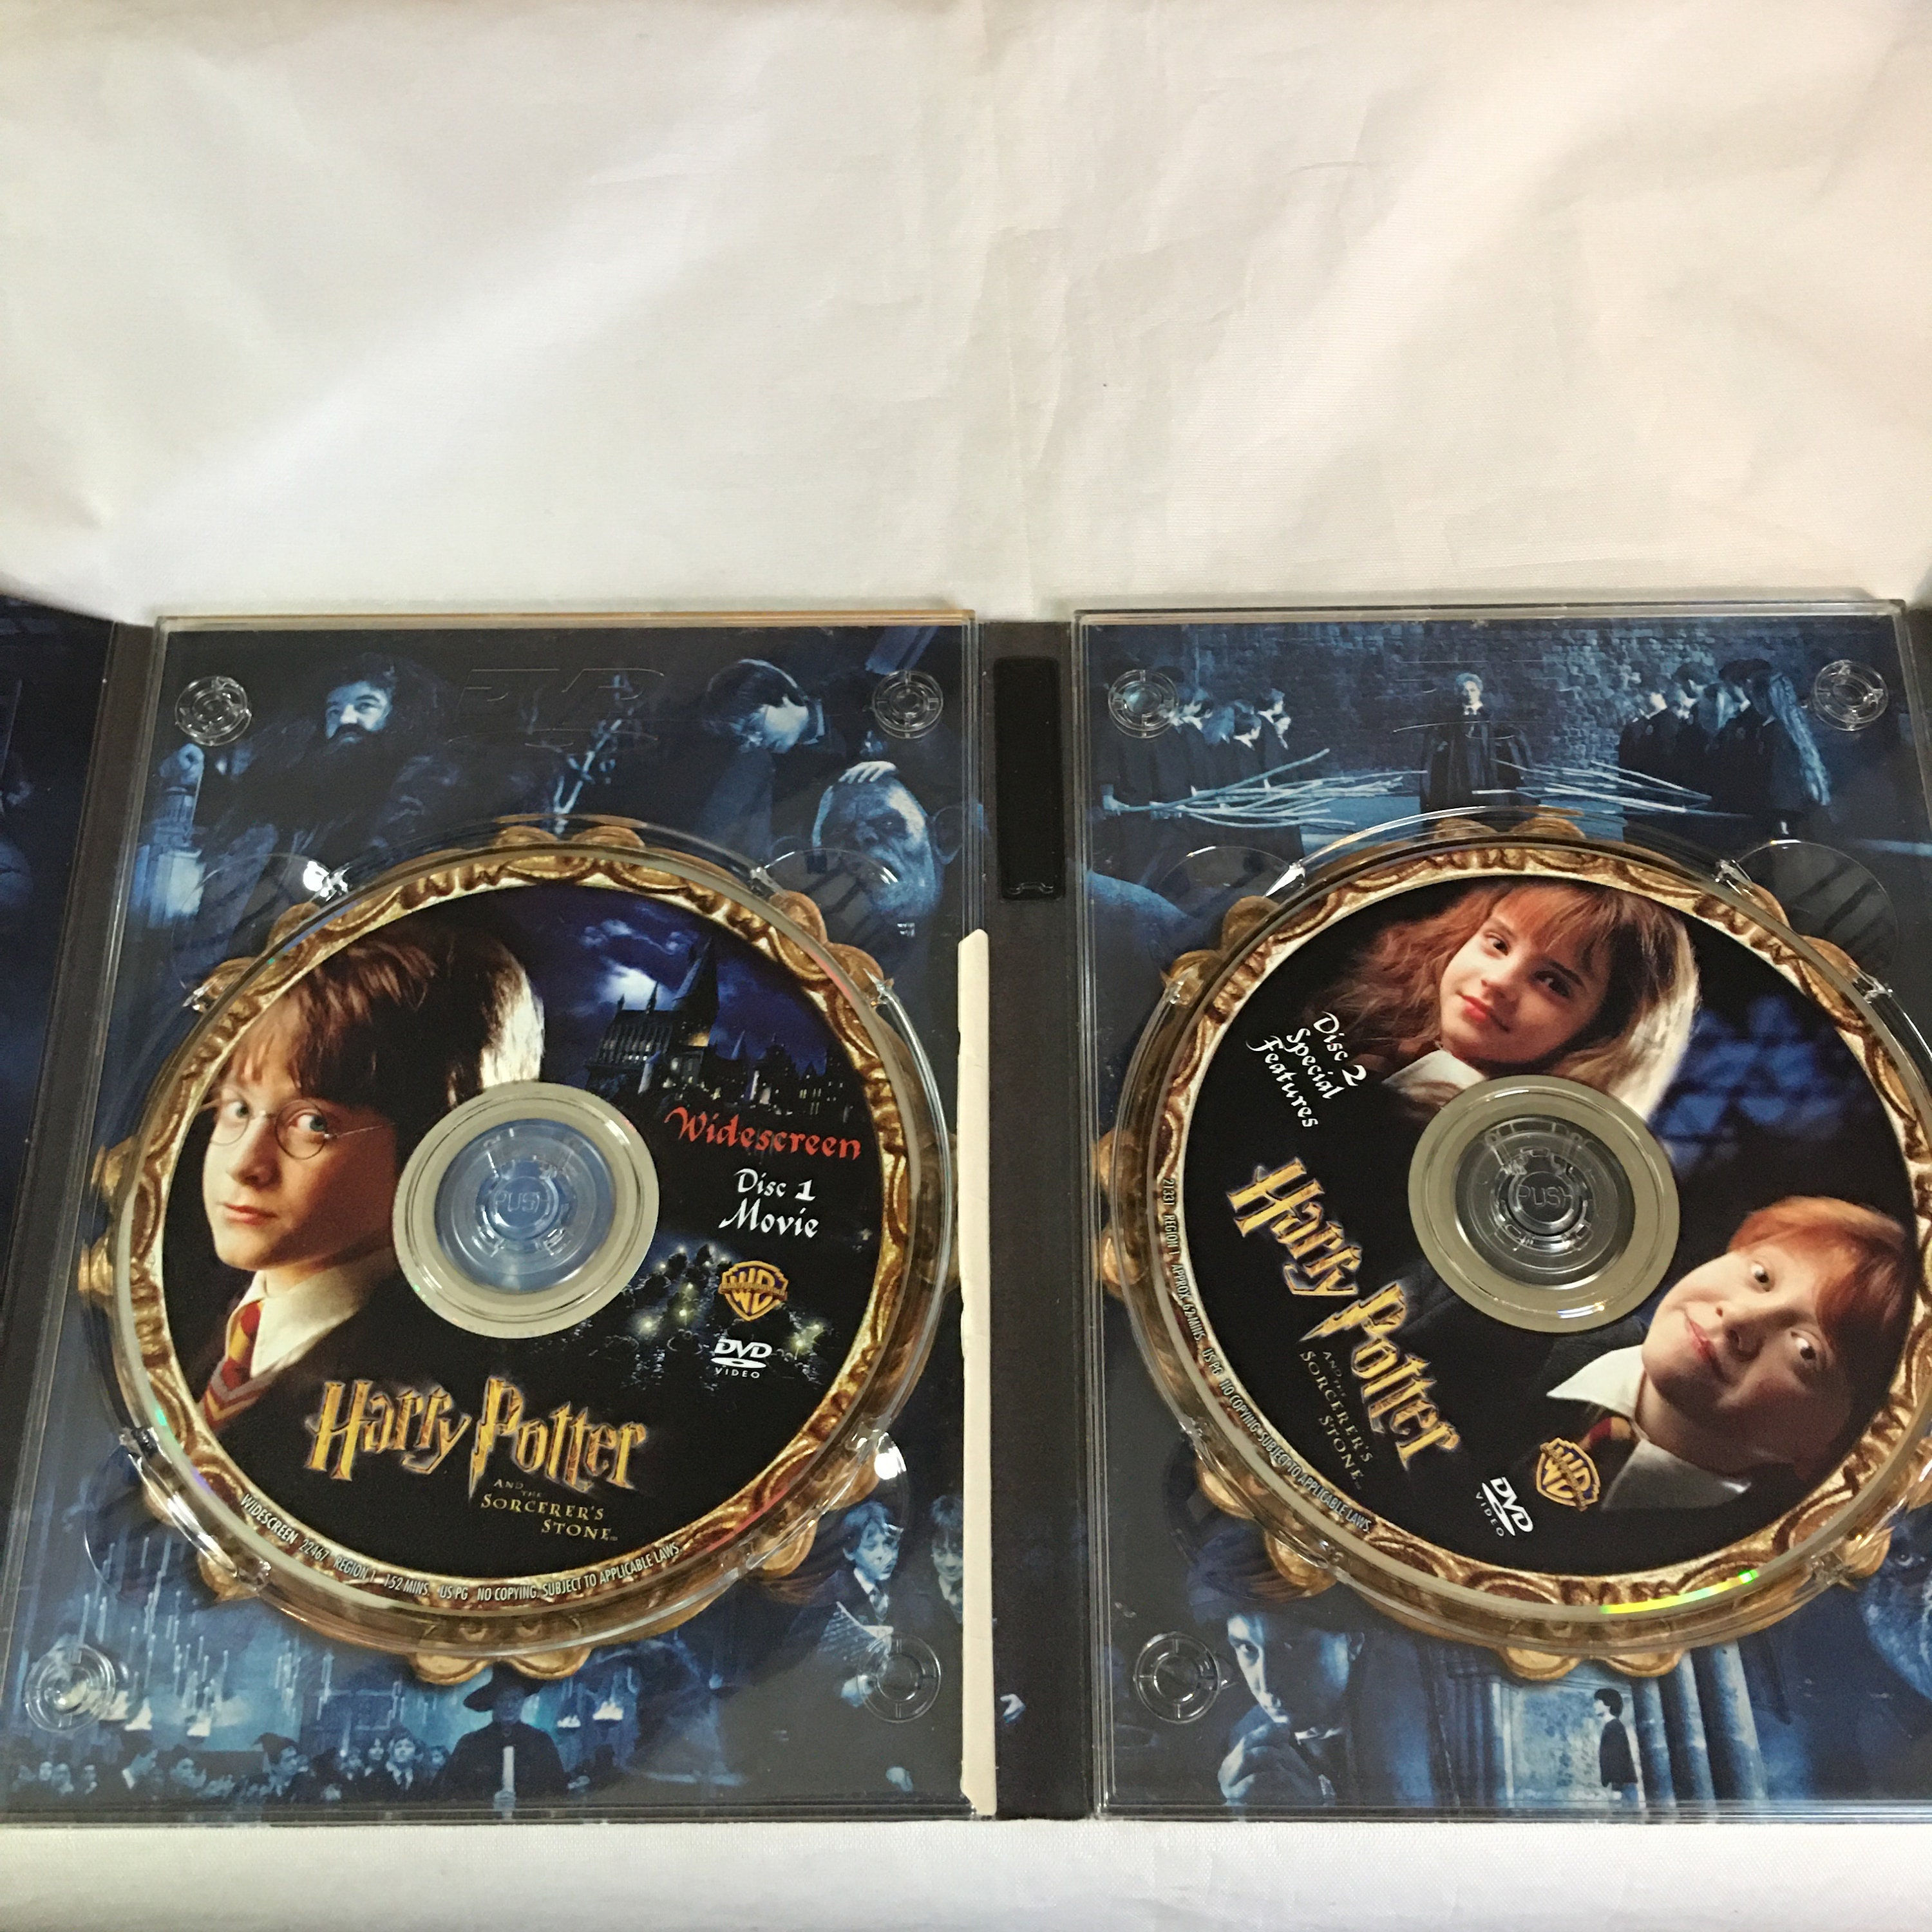 Harry Potter DVD Widescreen Editions 2 Disc Sets Sorcerers Chamber